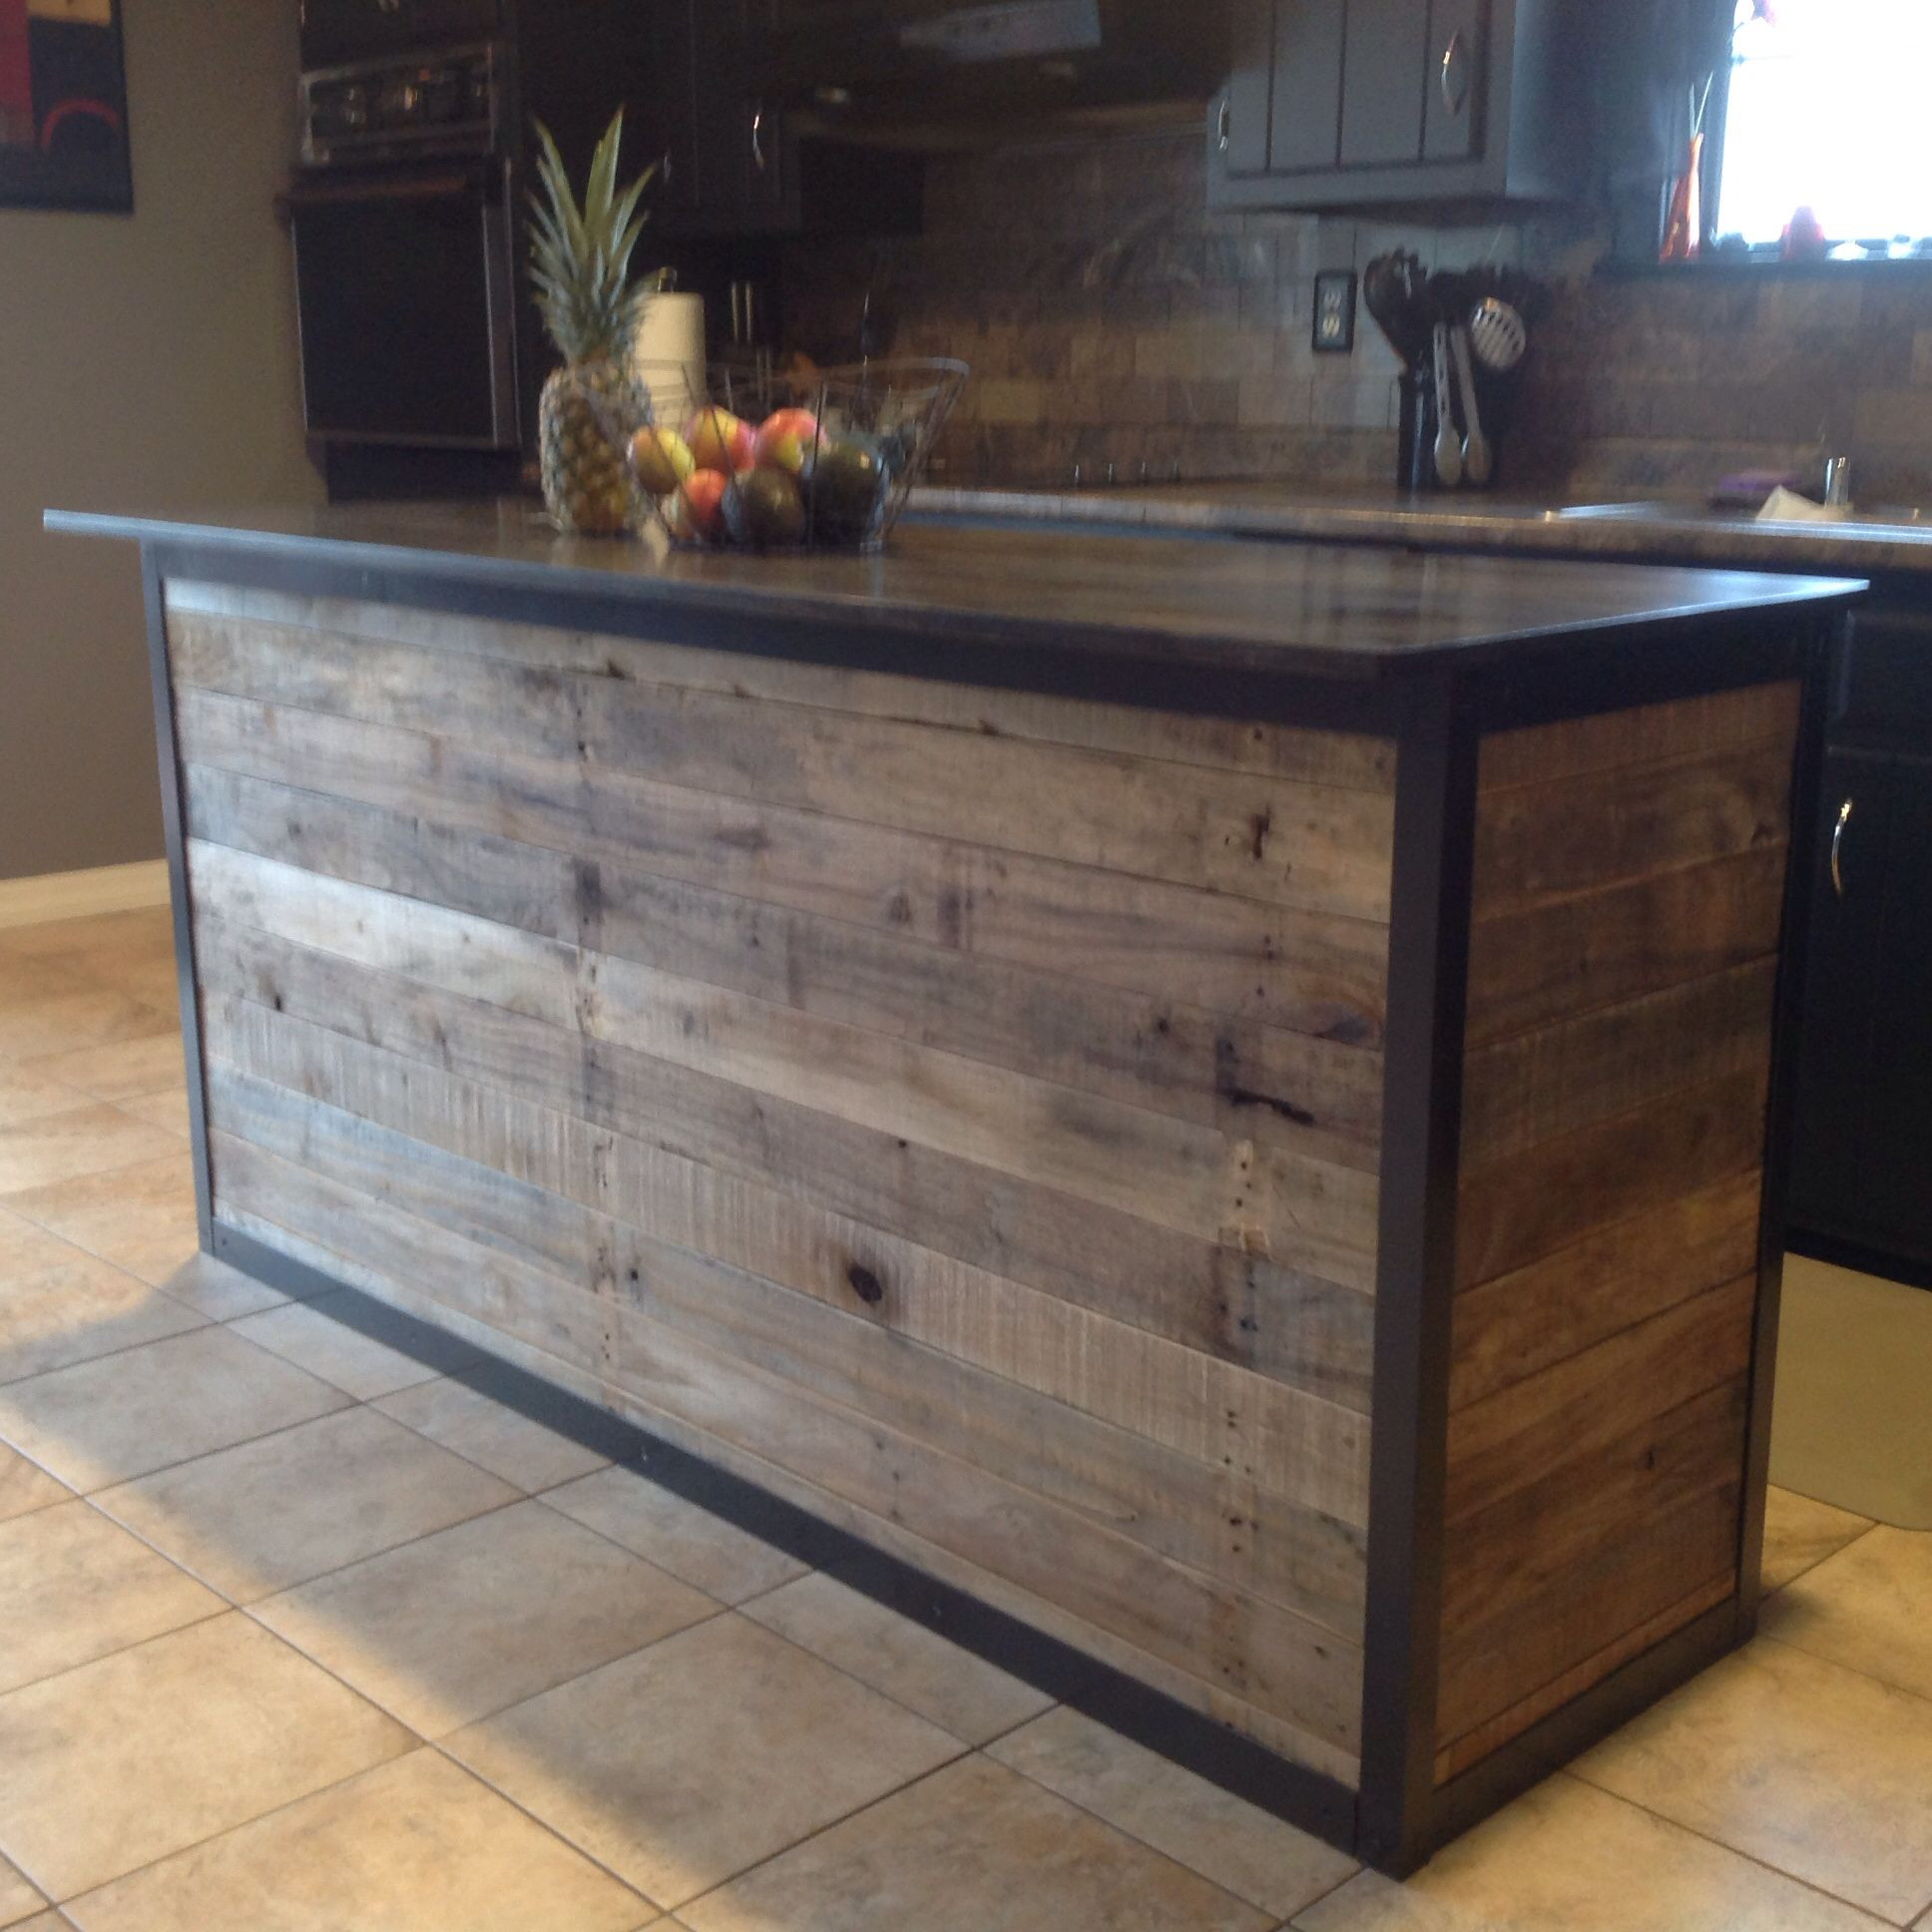 Reclaimed Wood Kitchen Island DIY
 34 Awesome Basement Bar Ideas and How To Make It With Low